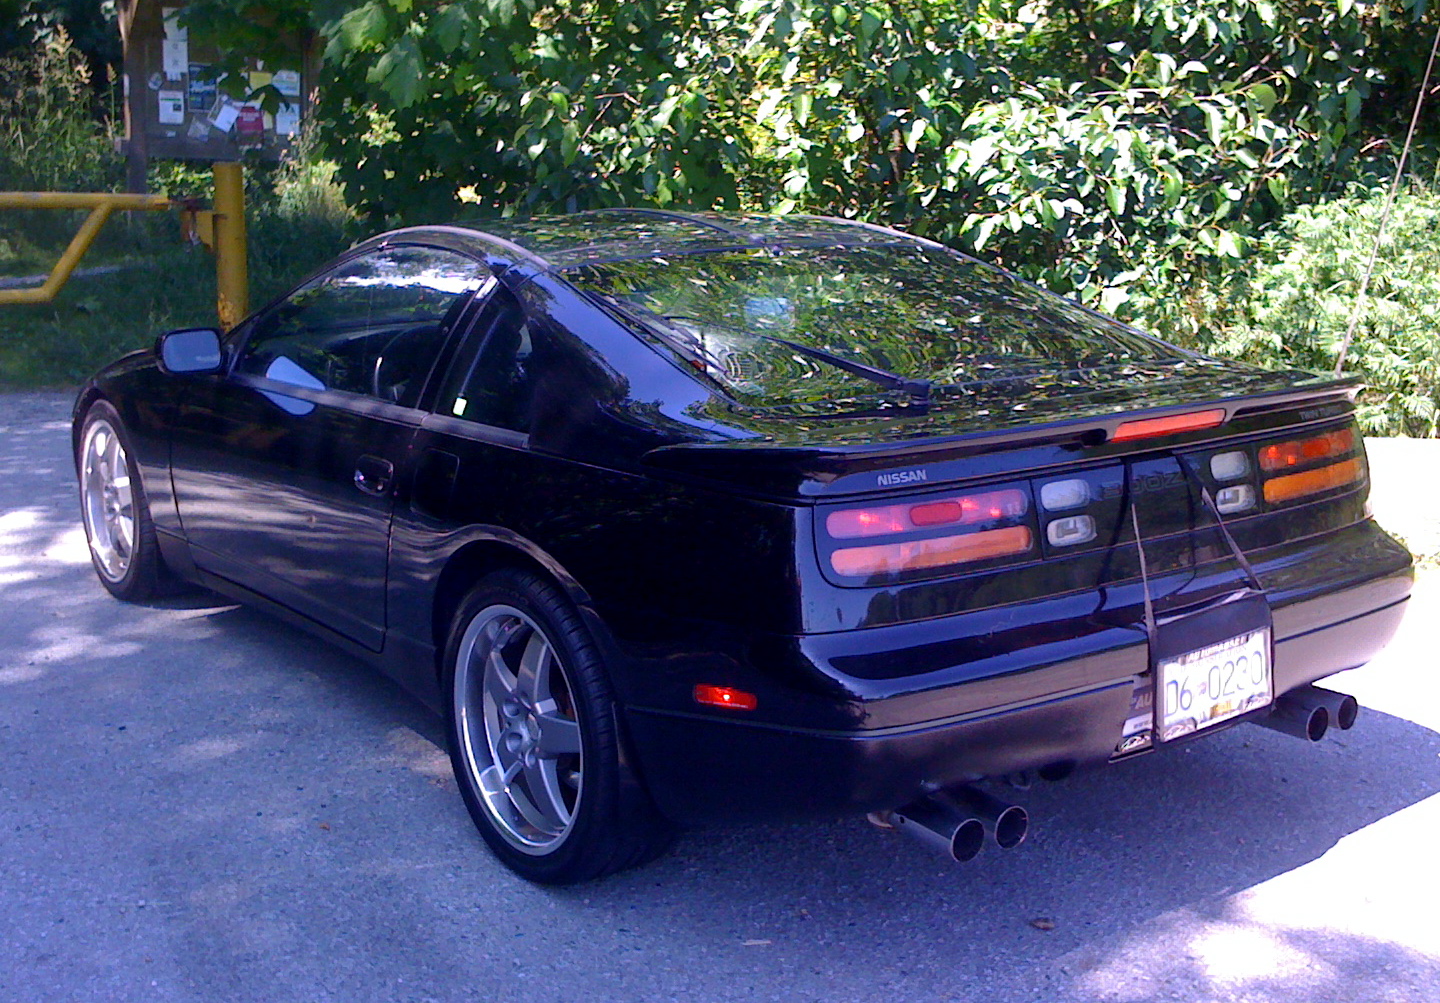 Nissan 300zx twin turbo review #9